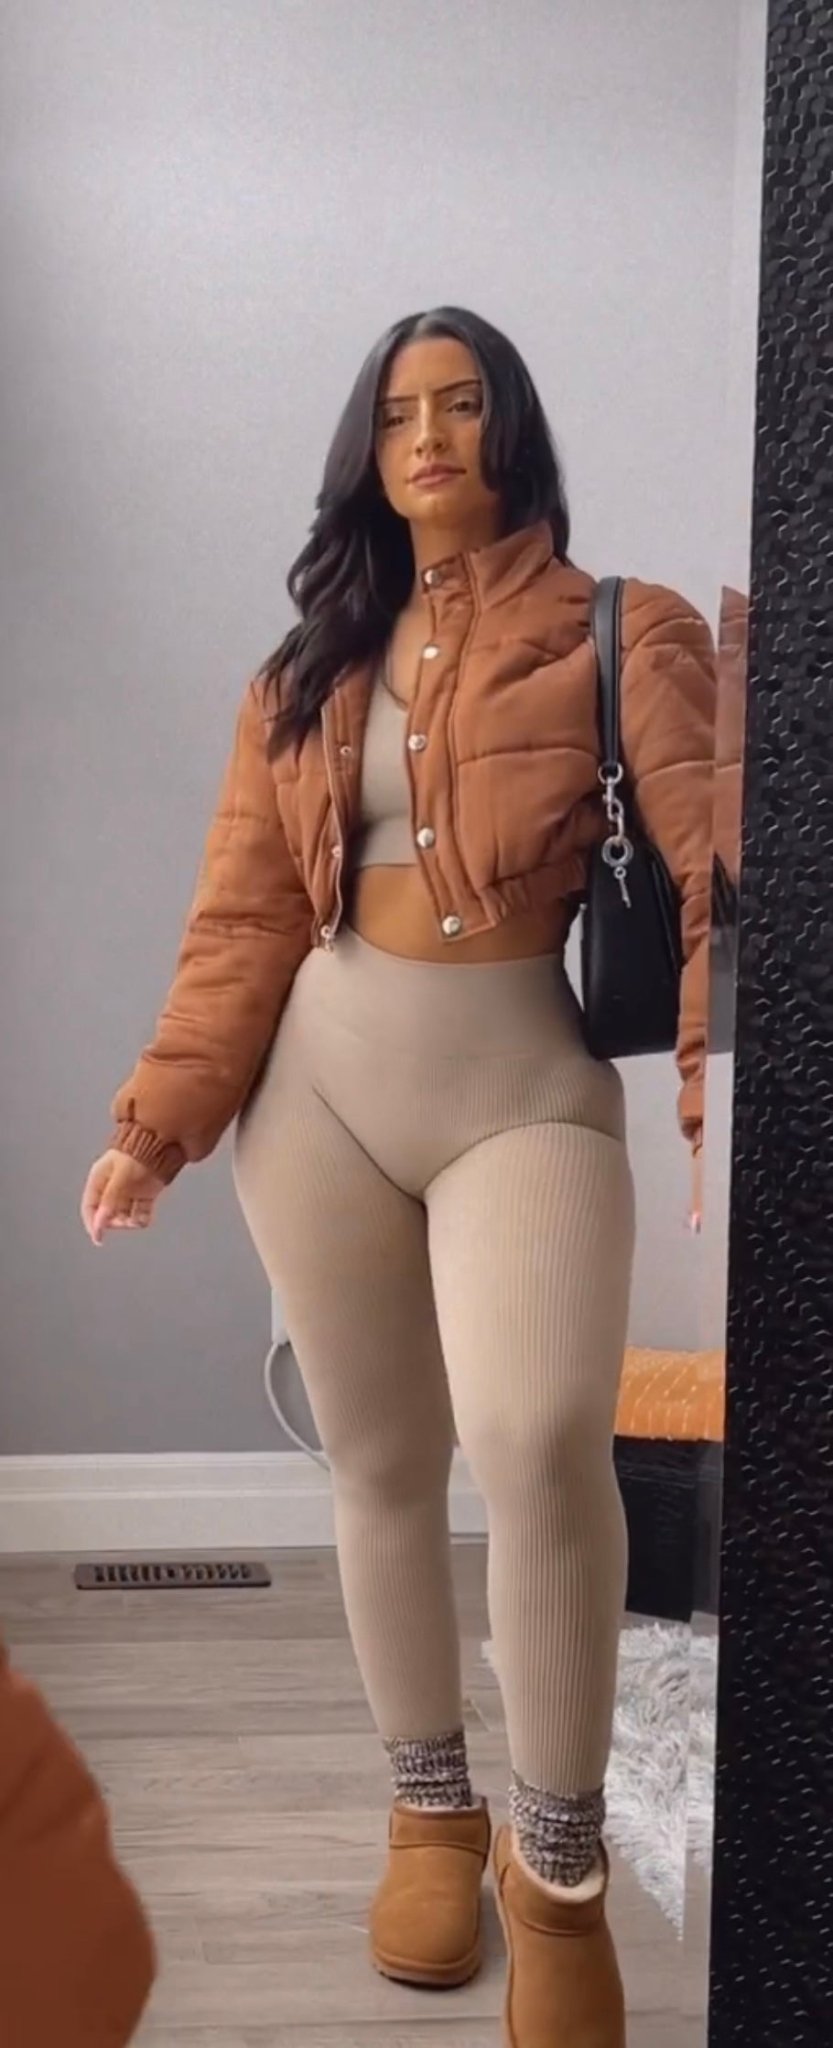 THICK WAISTBAND RIBBED LEGGINGS